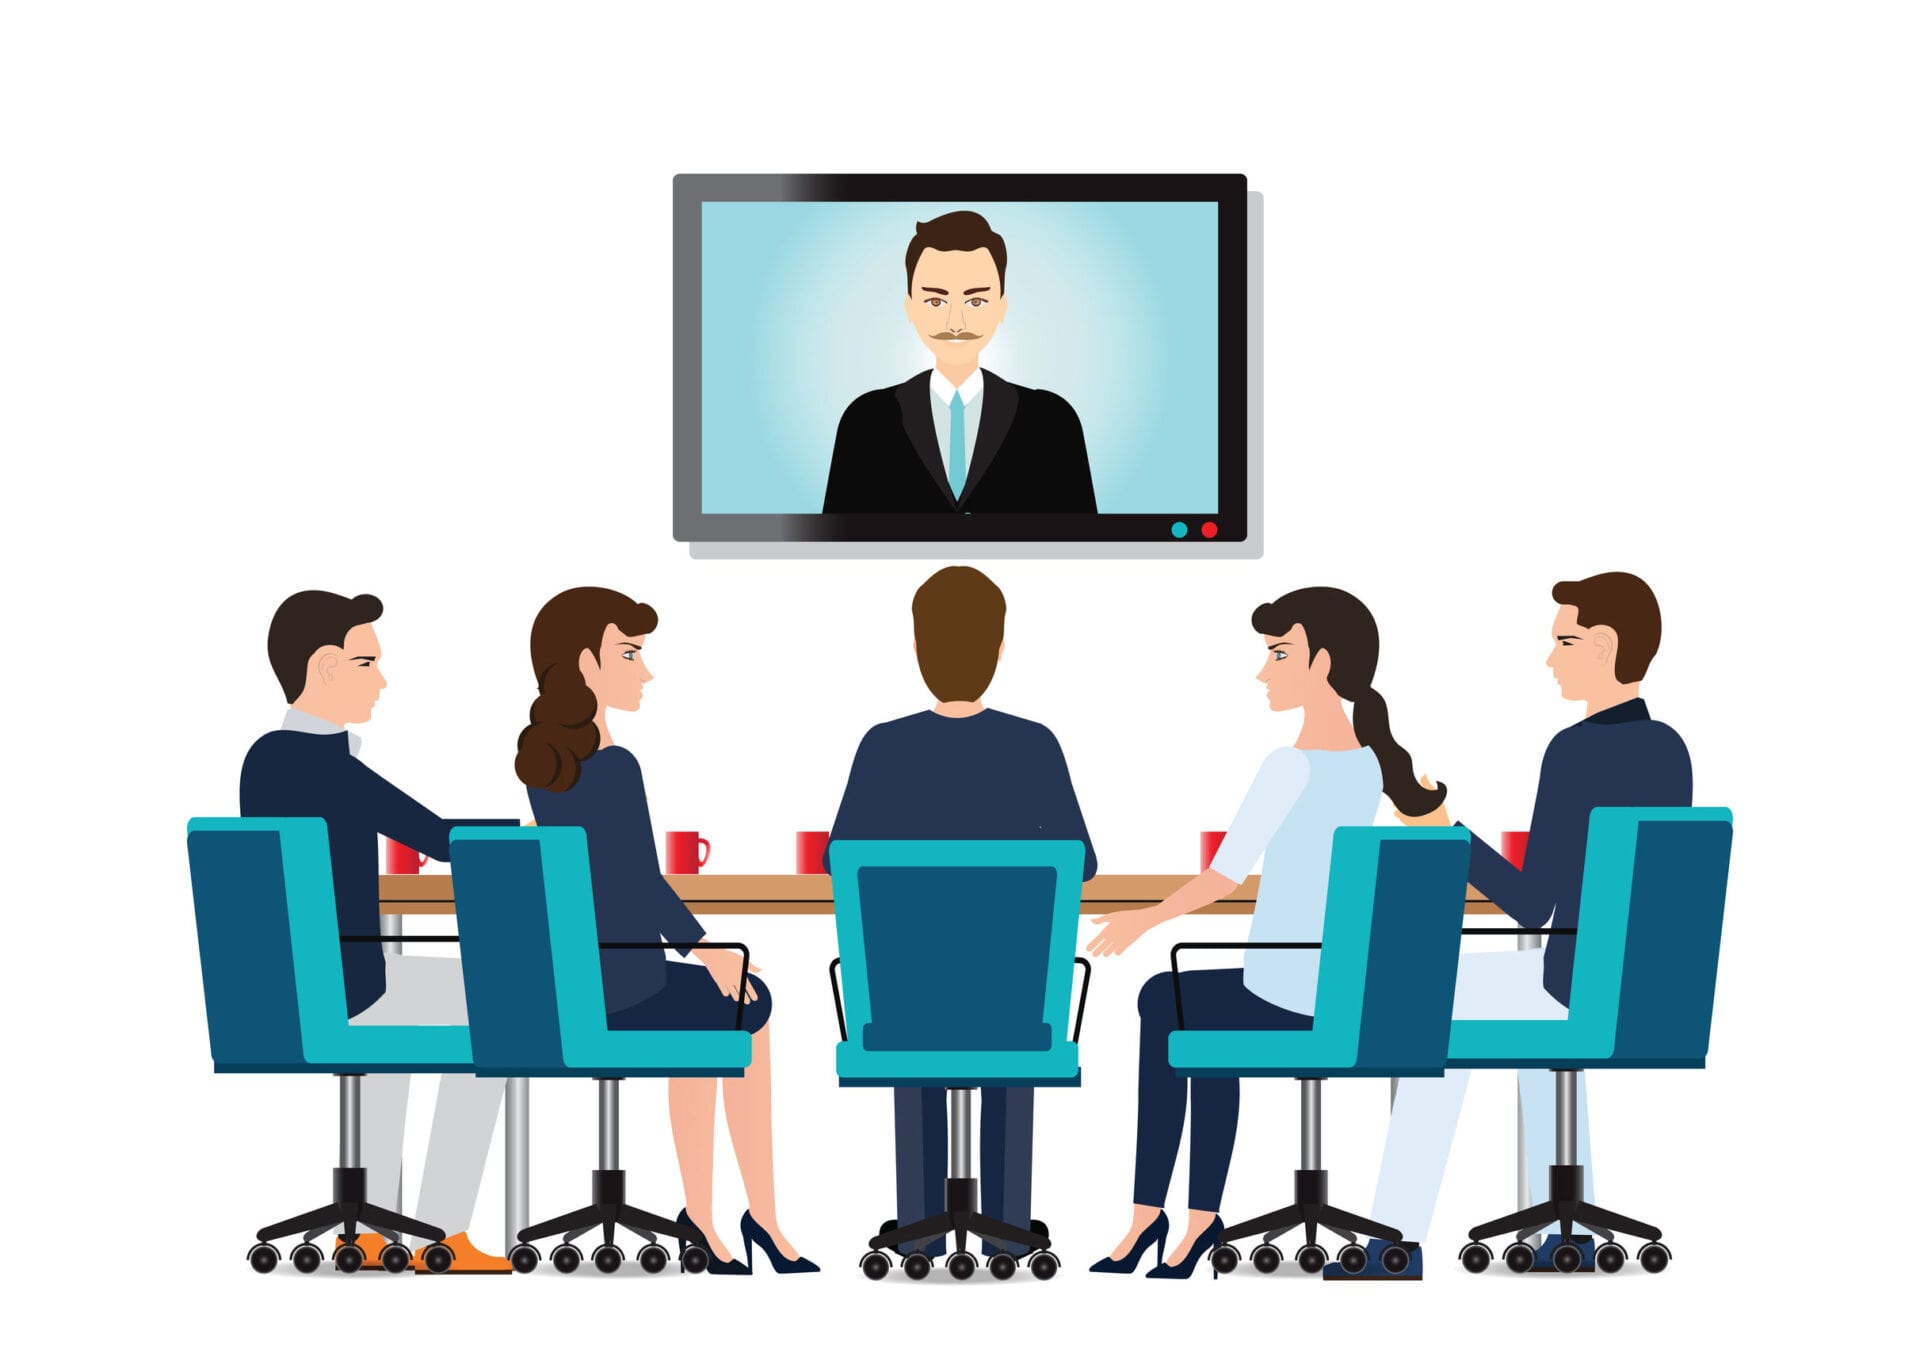 Business people attending videoconference meeting.